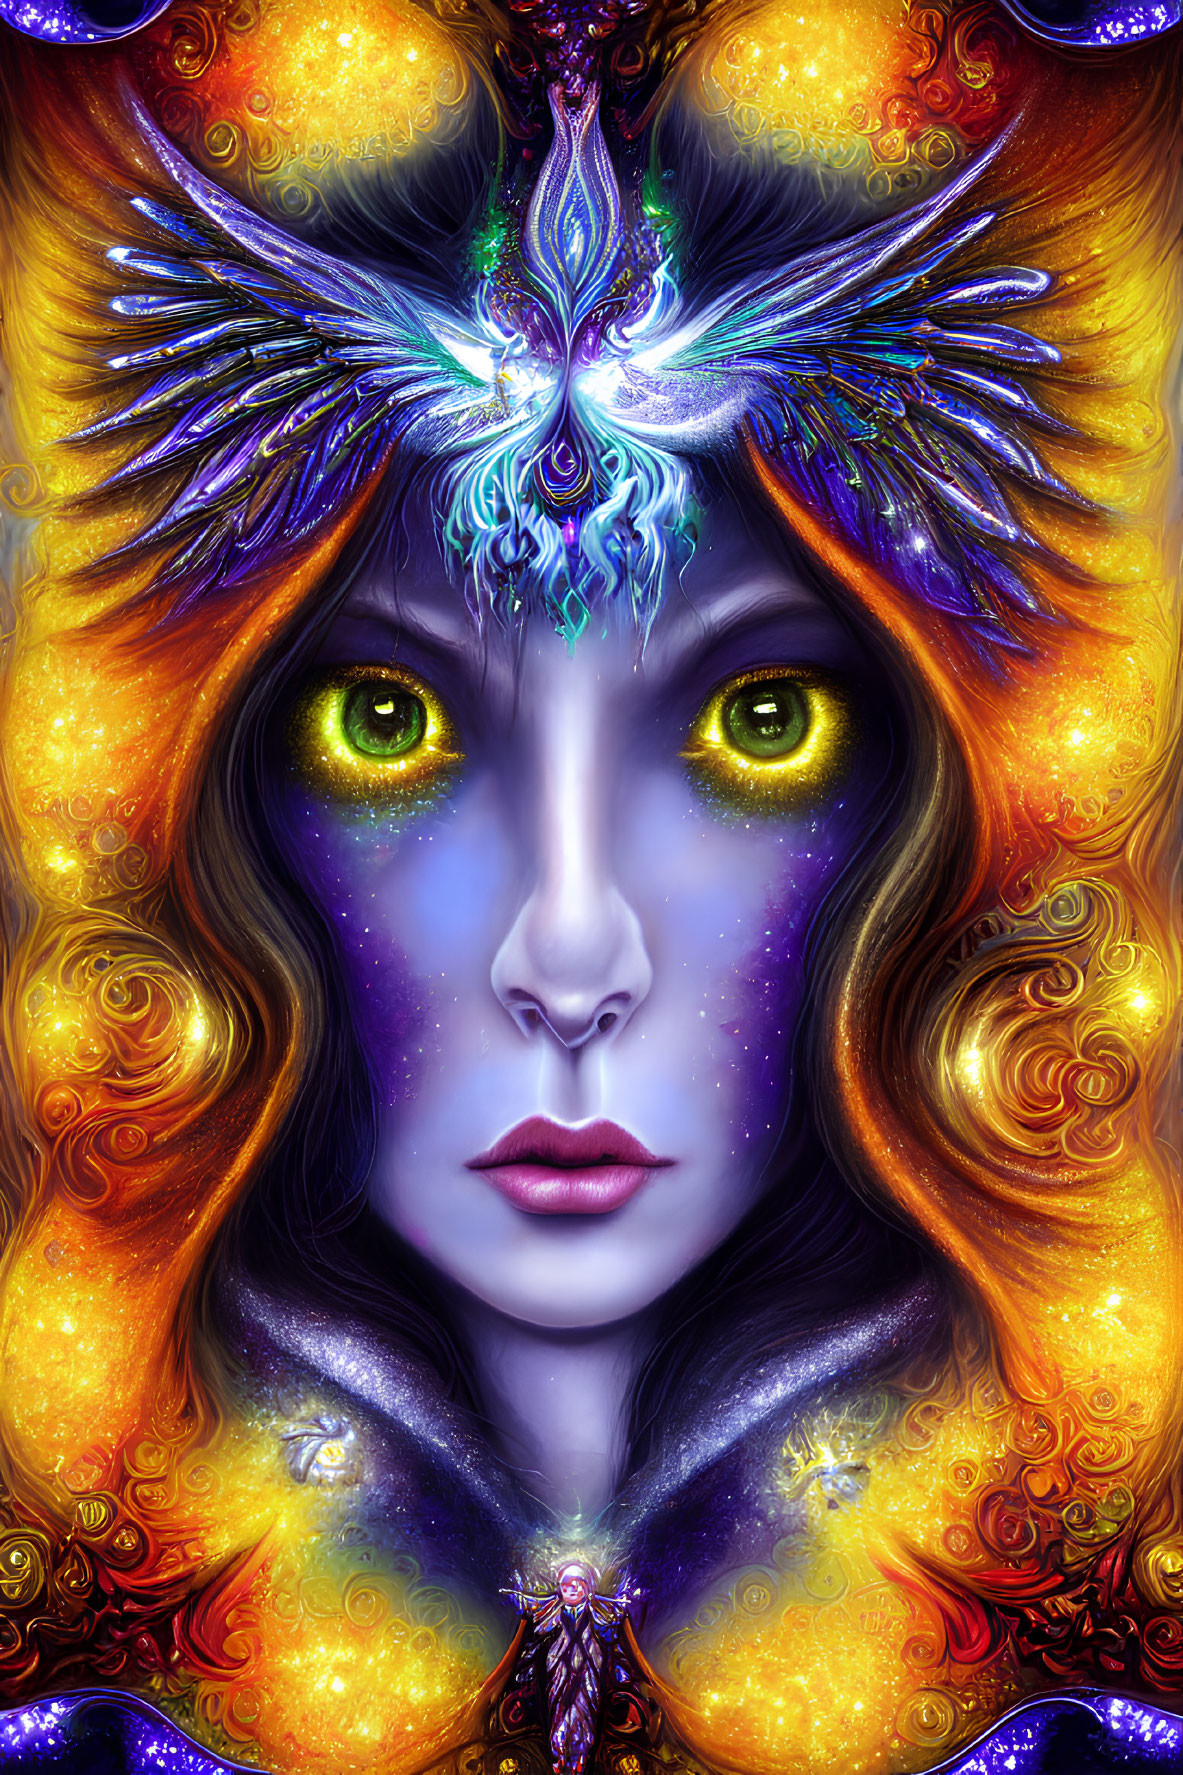 Colorful digital artwork of woman with yellow eyes and ornate headdress surrounded by vibrant patterns